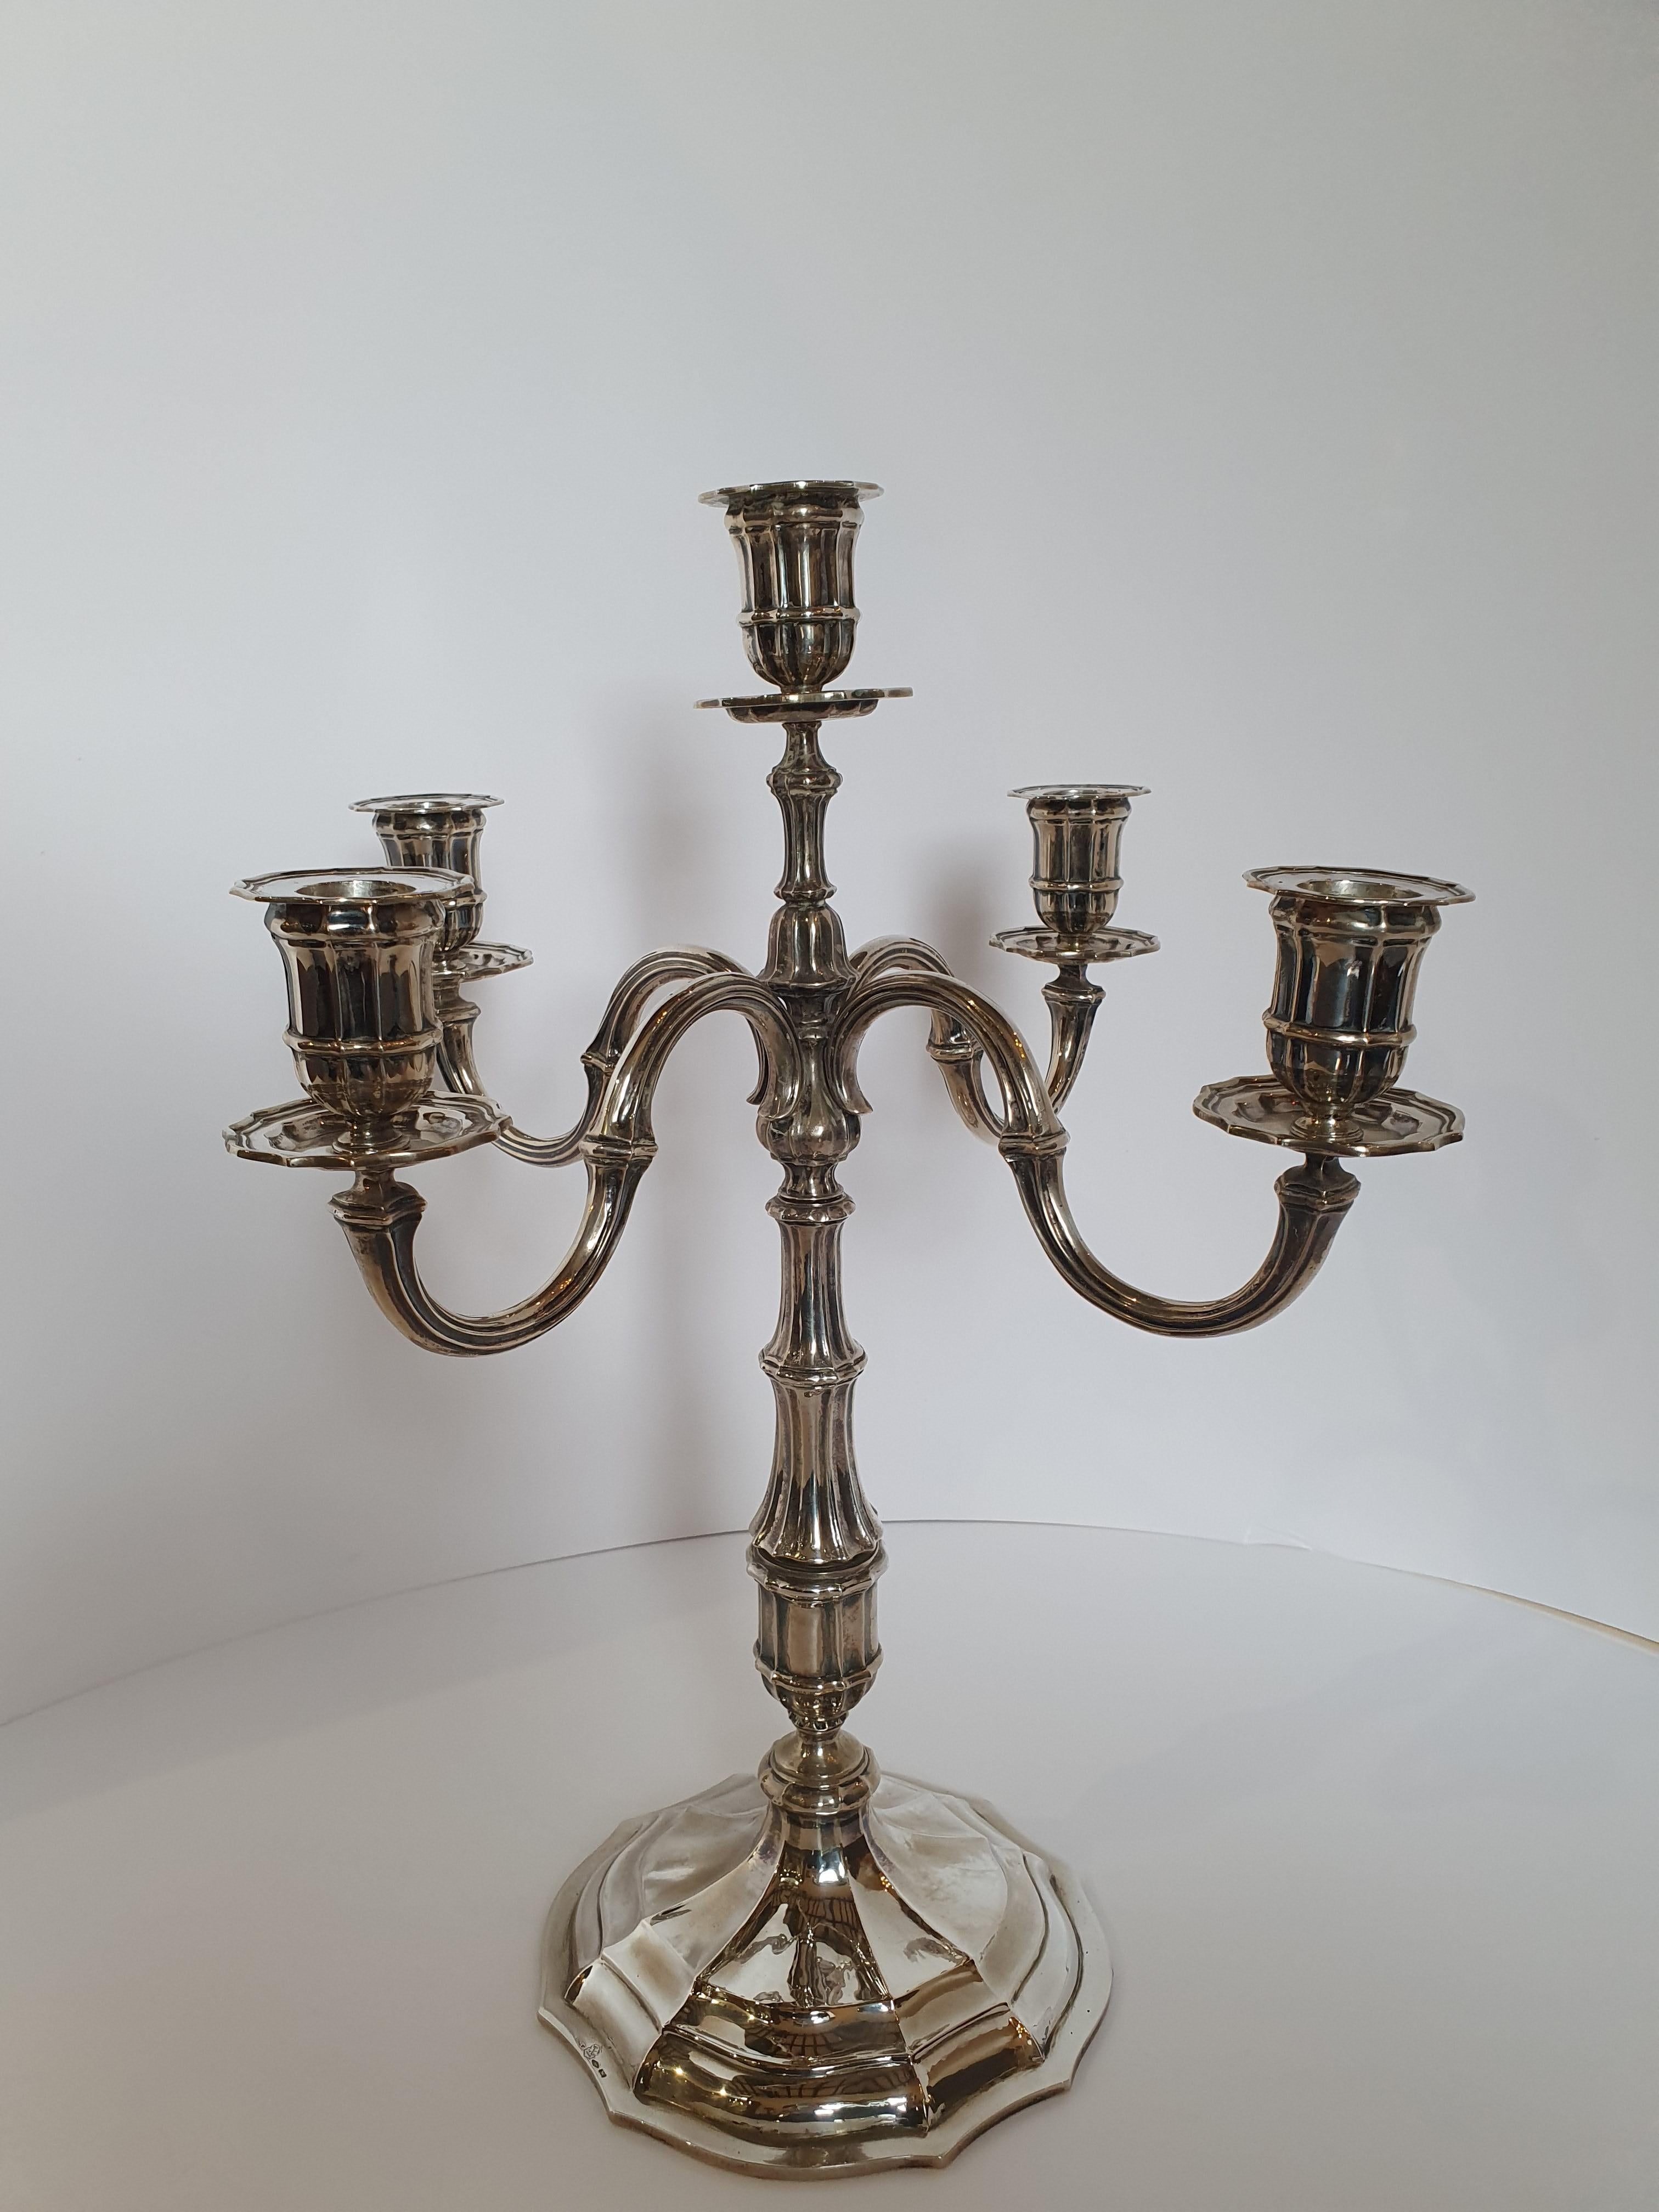 Magnificent handcrafted five-flame candelabra reproduces the Classic Milanese style of the mid-18th century.
A majestic and elegant piece of incomparable craftsmanship for a high-class home
Pradella Iario, founded in 1920, was the greatest Italian